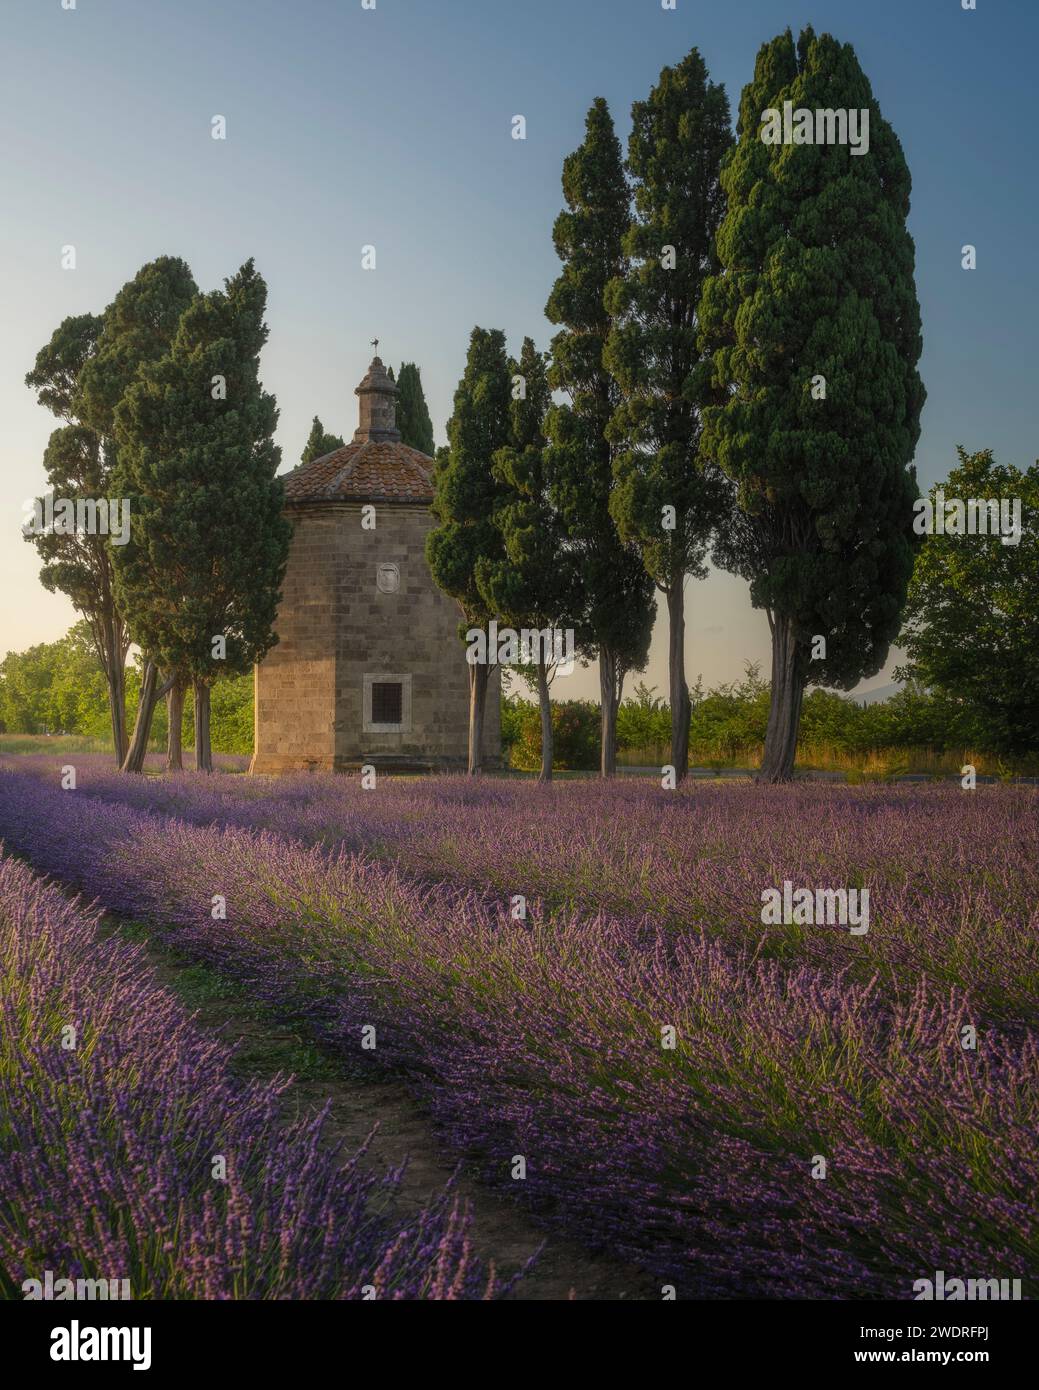 Blooming lavender field, cypress trees and Oratorio di San Guido church. Bolgheri, province of Livorno, Tuscany region, Italy Stock Photo